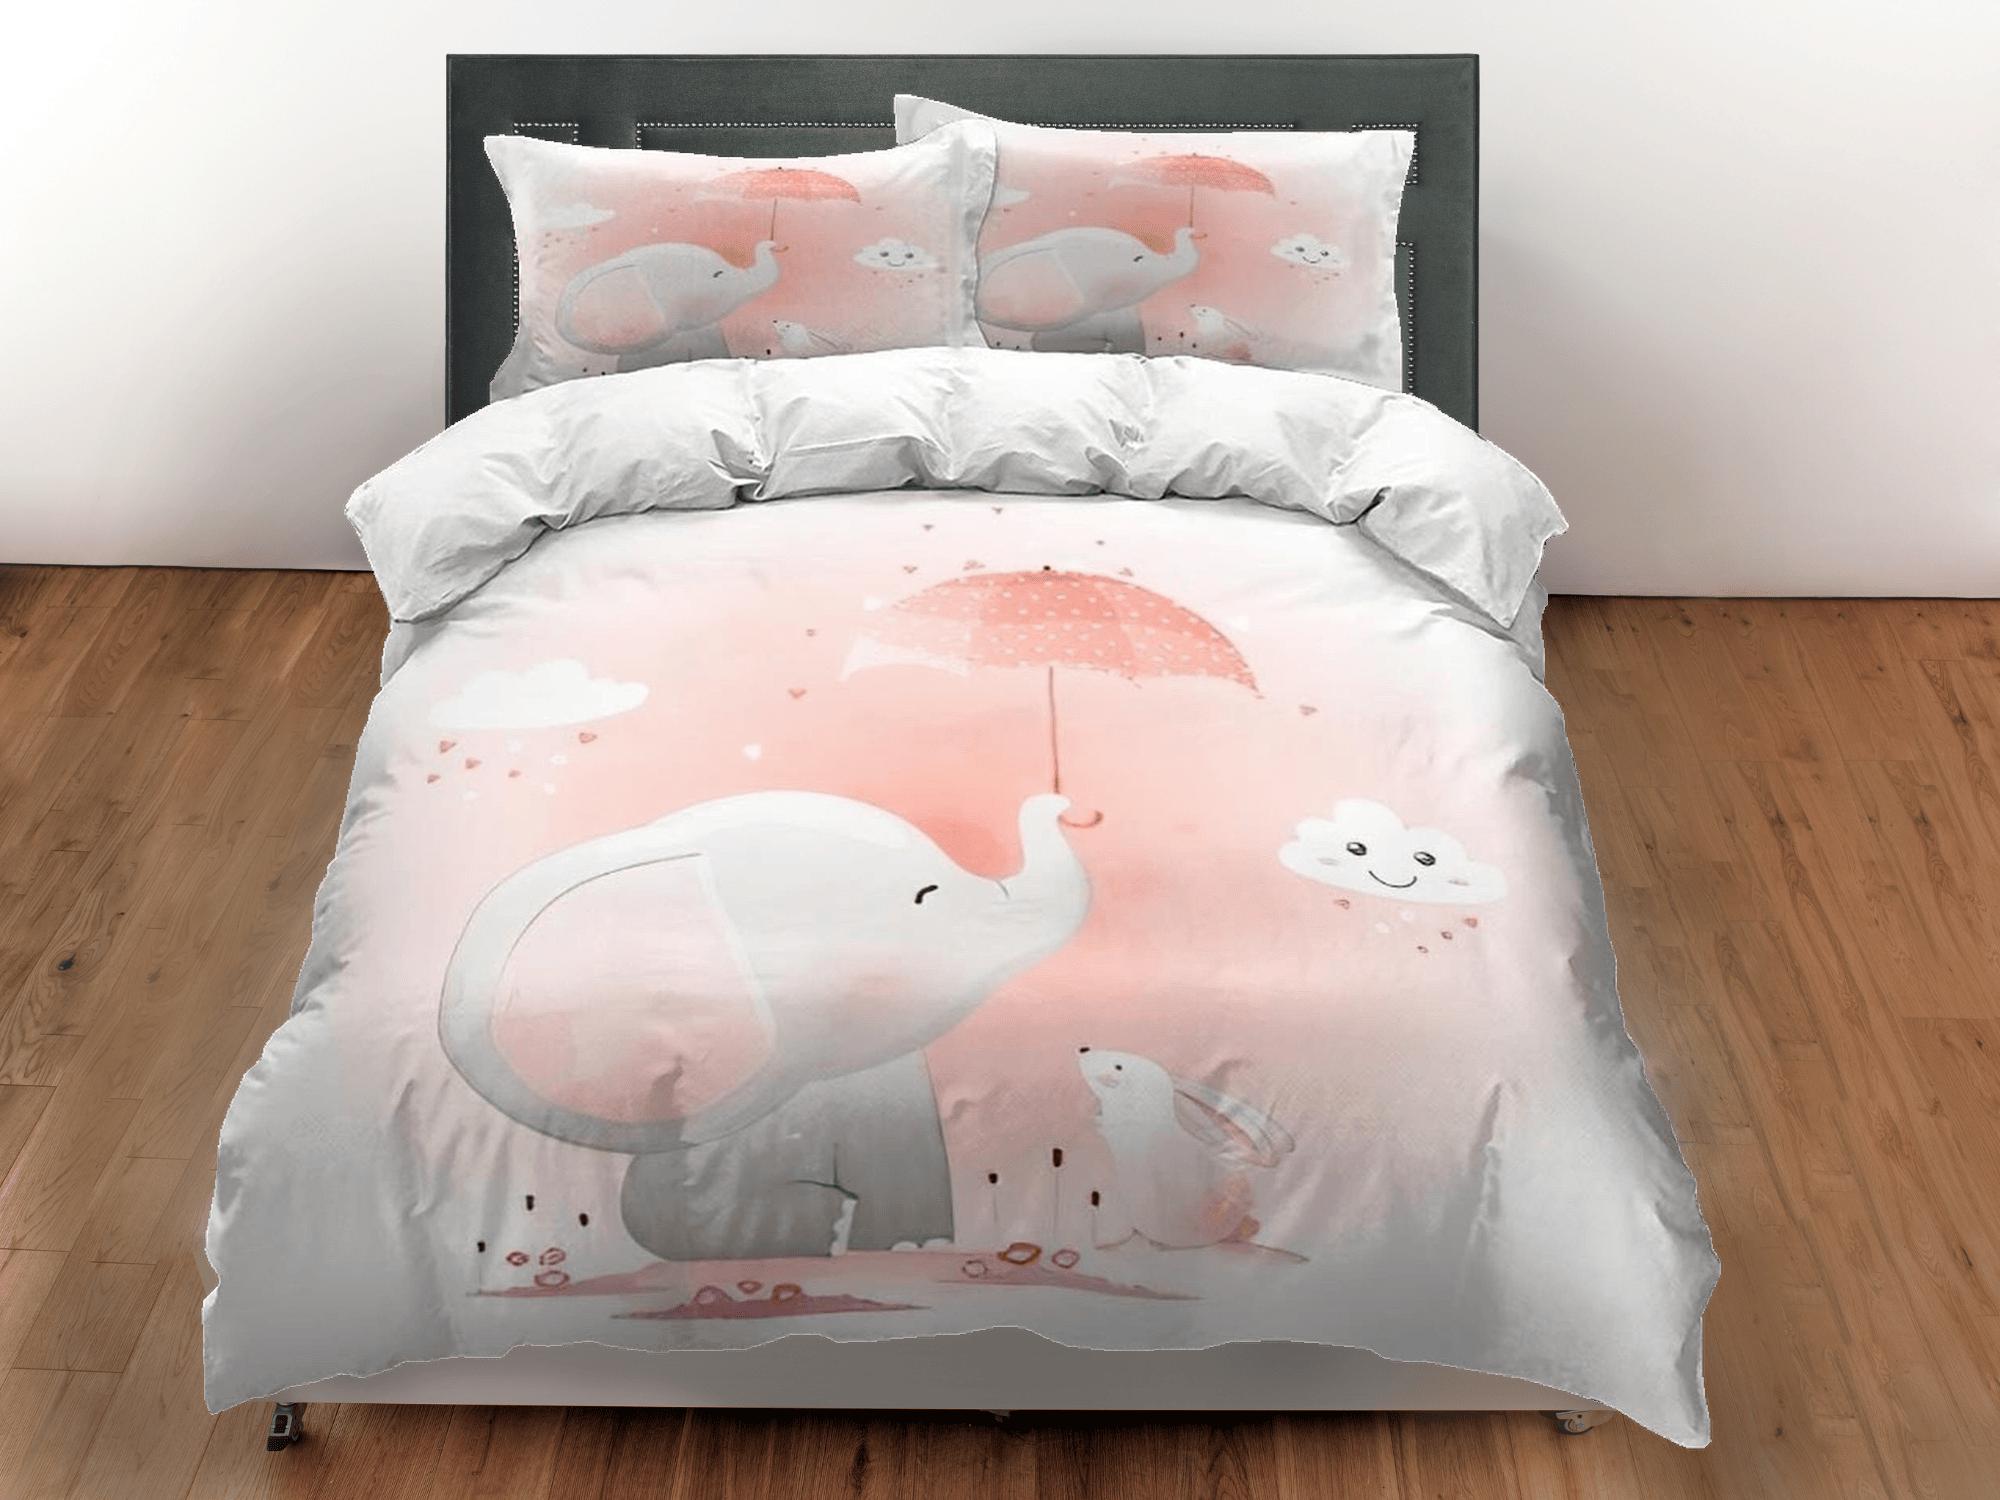 daintyduvet Elephant and bunny in a rainy day bedding cute duvet cover set, kids bedding full, nursery bed decor, elephant baby shower, toddler bedding